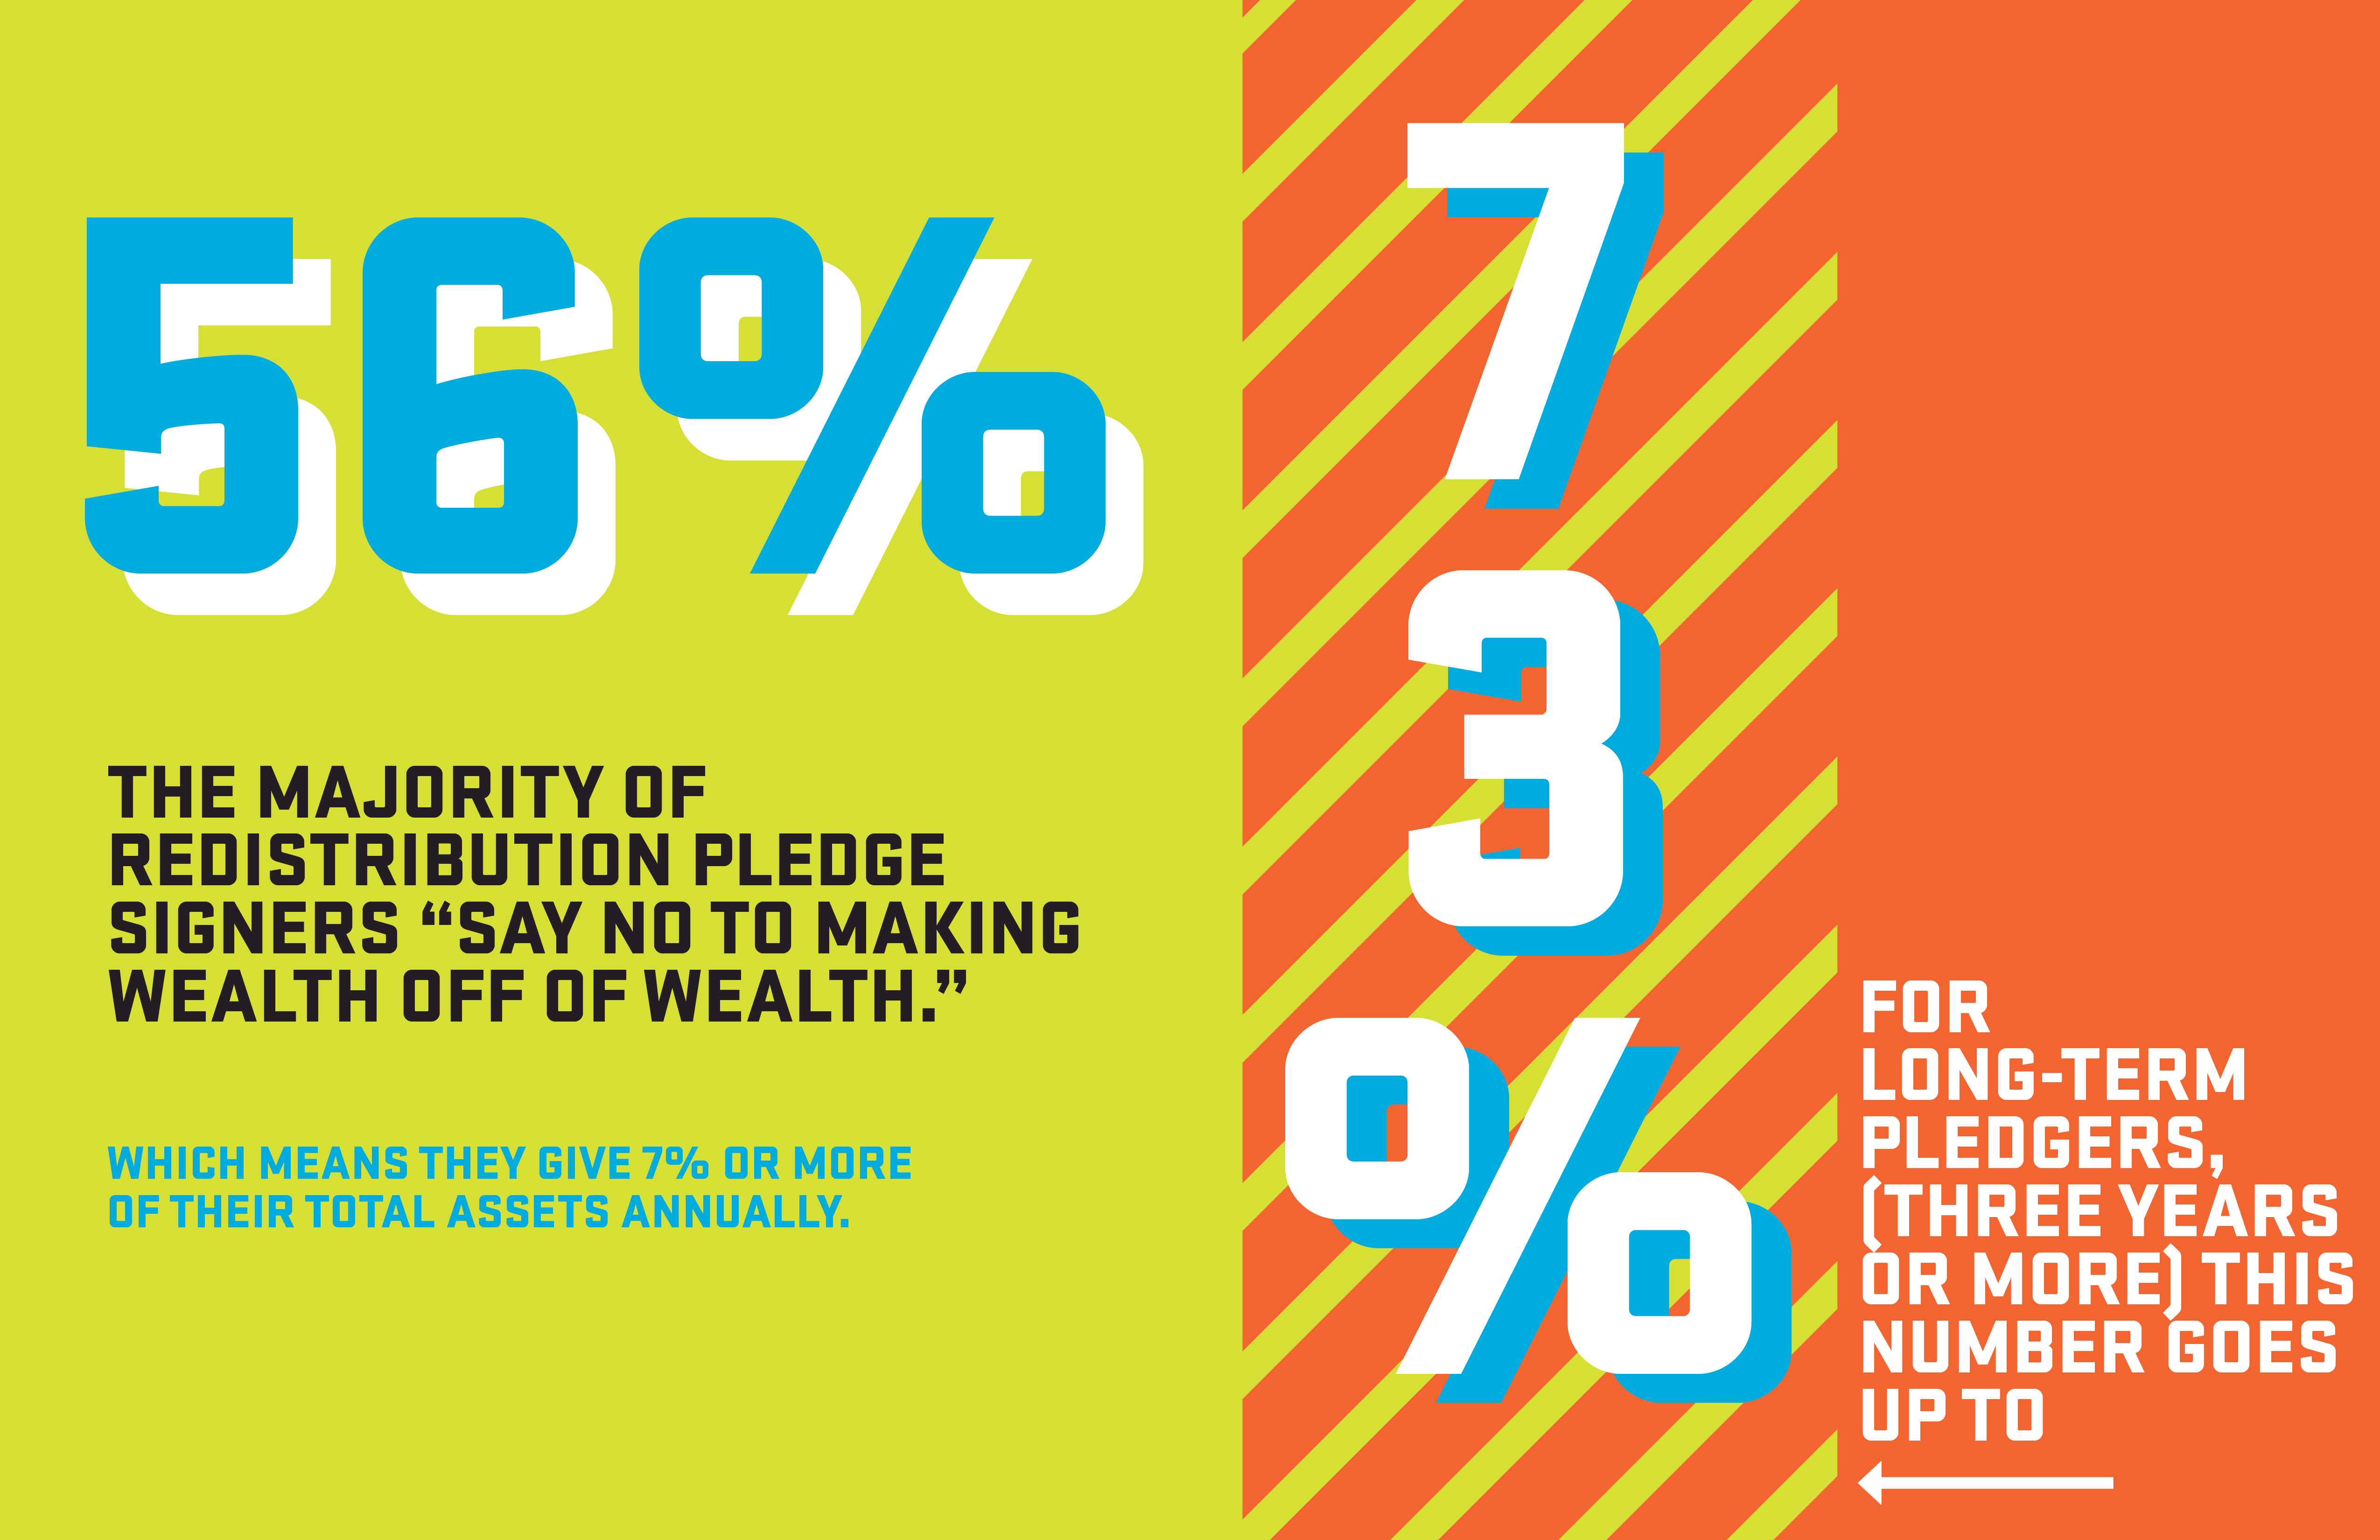 56% of Redistribution Pledge Signers "Say No to Making Wealth Off of Wealth." Which means they give 7% or more of their total assets annually. For long-term  pledgers (3 or more years), this number goes up to 73% 